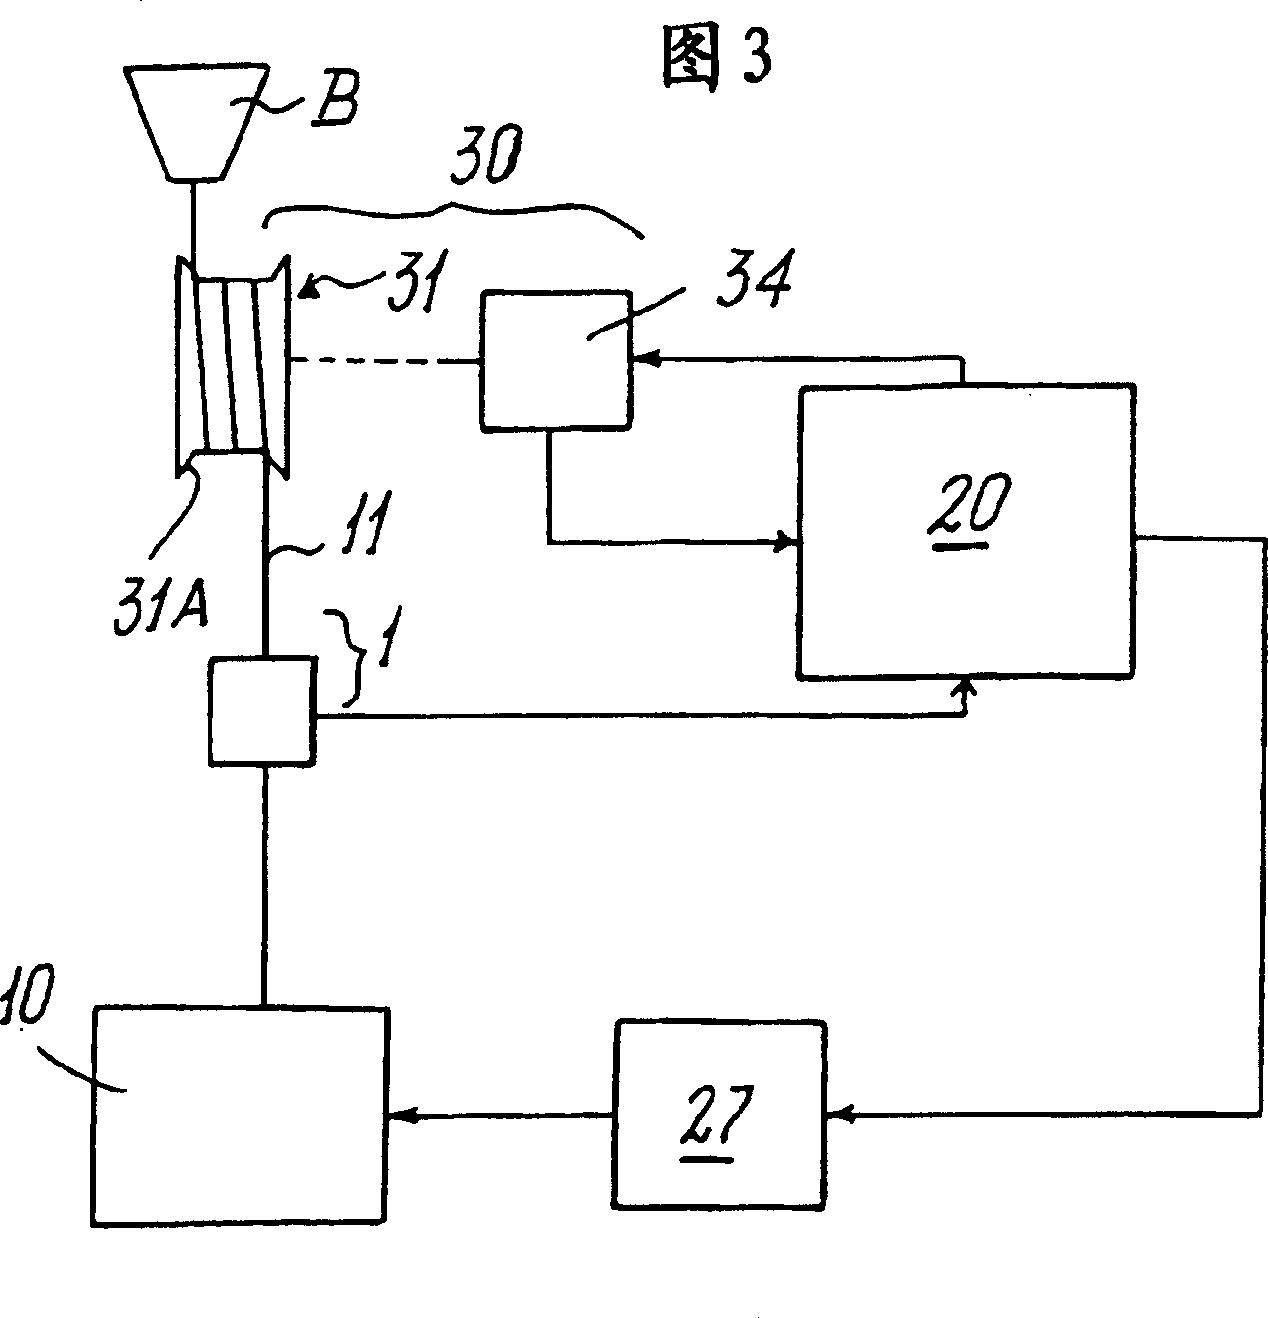 Device and method for feeding an elastomeric yarn to a textile machine